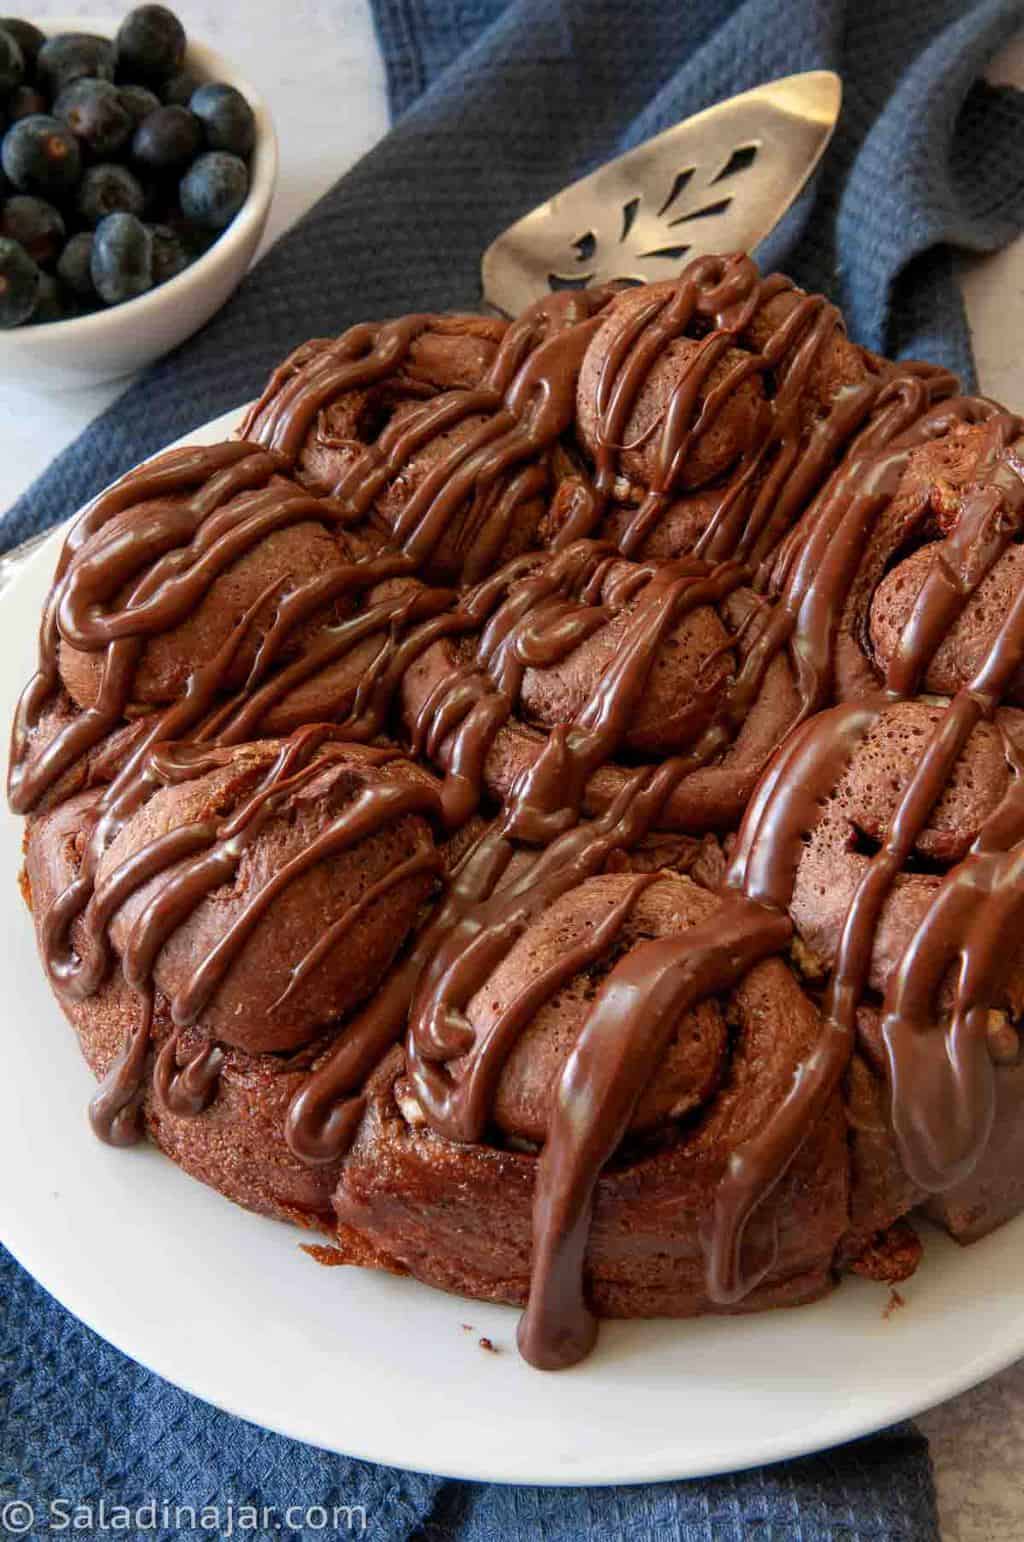 Ready-to-eat Chocolate Cinnamon Rolls with Chocolate Frosting drizzled over the top.